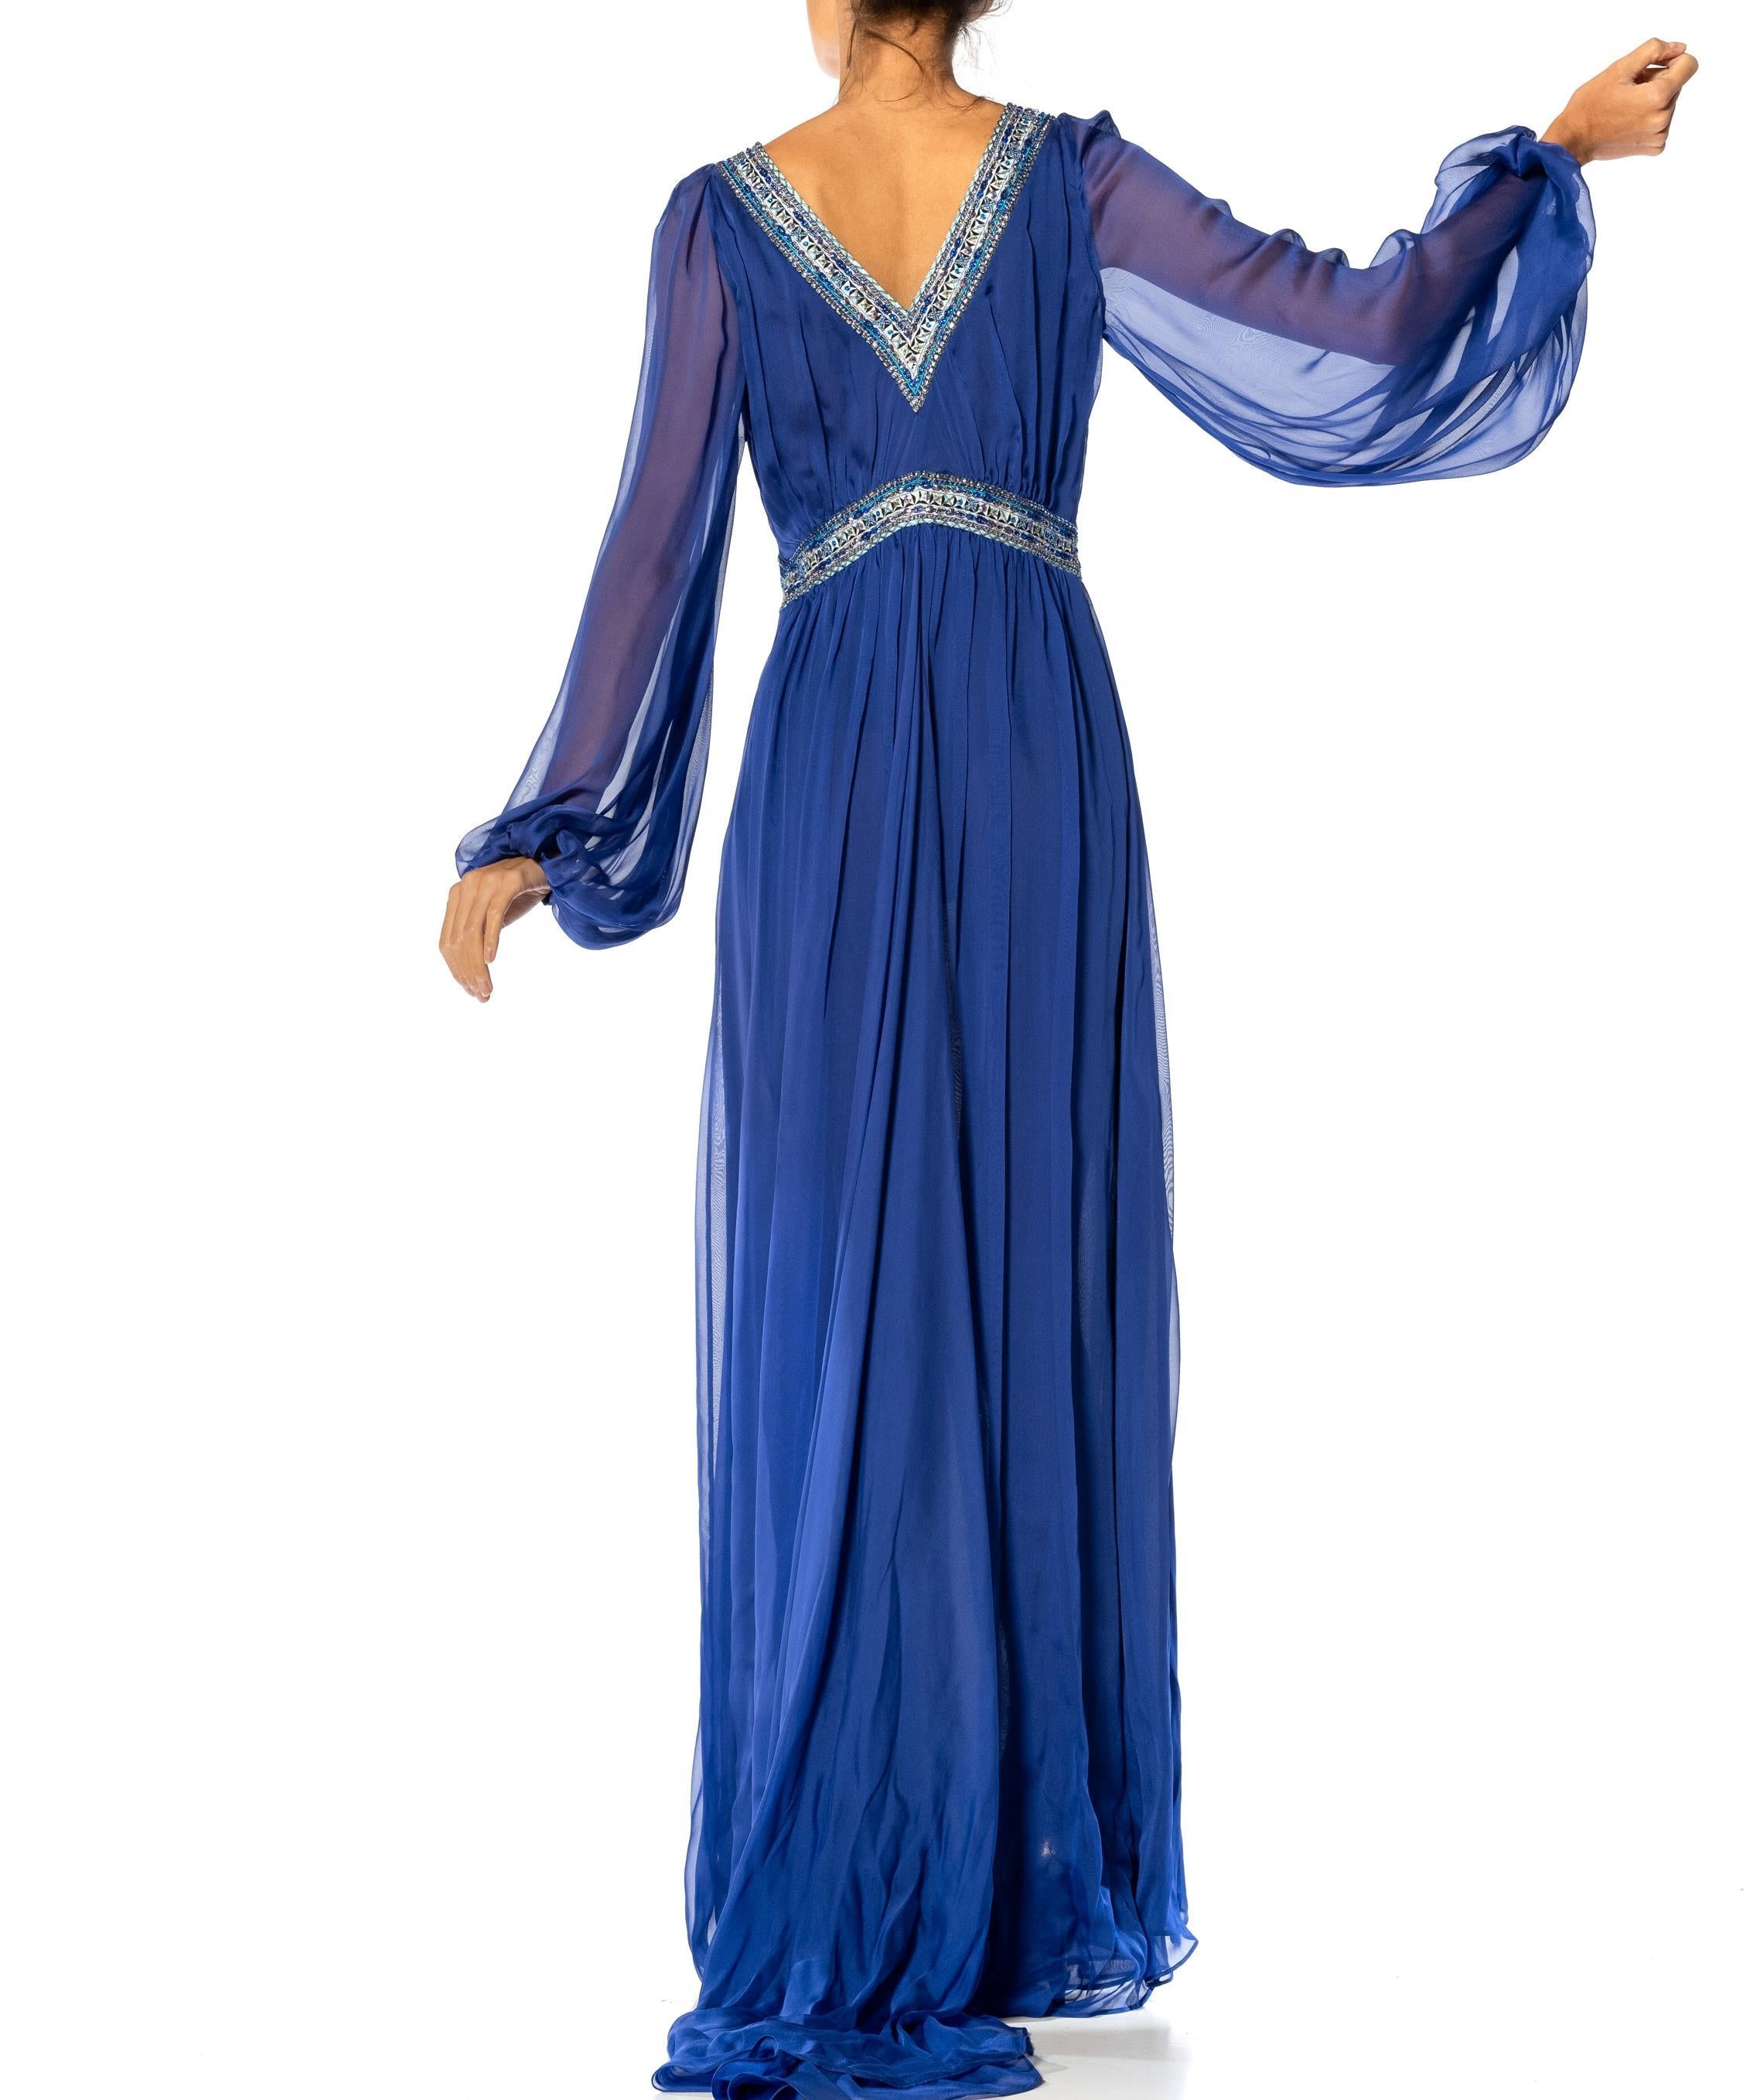 2000S EMILIO PUCCI Cobalt Blue Silk Chiffon Sleeved Gown With Beaded Print Deta For Sale 6